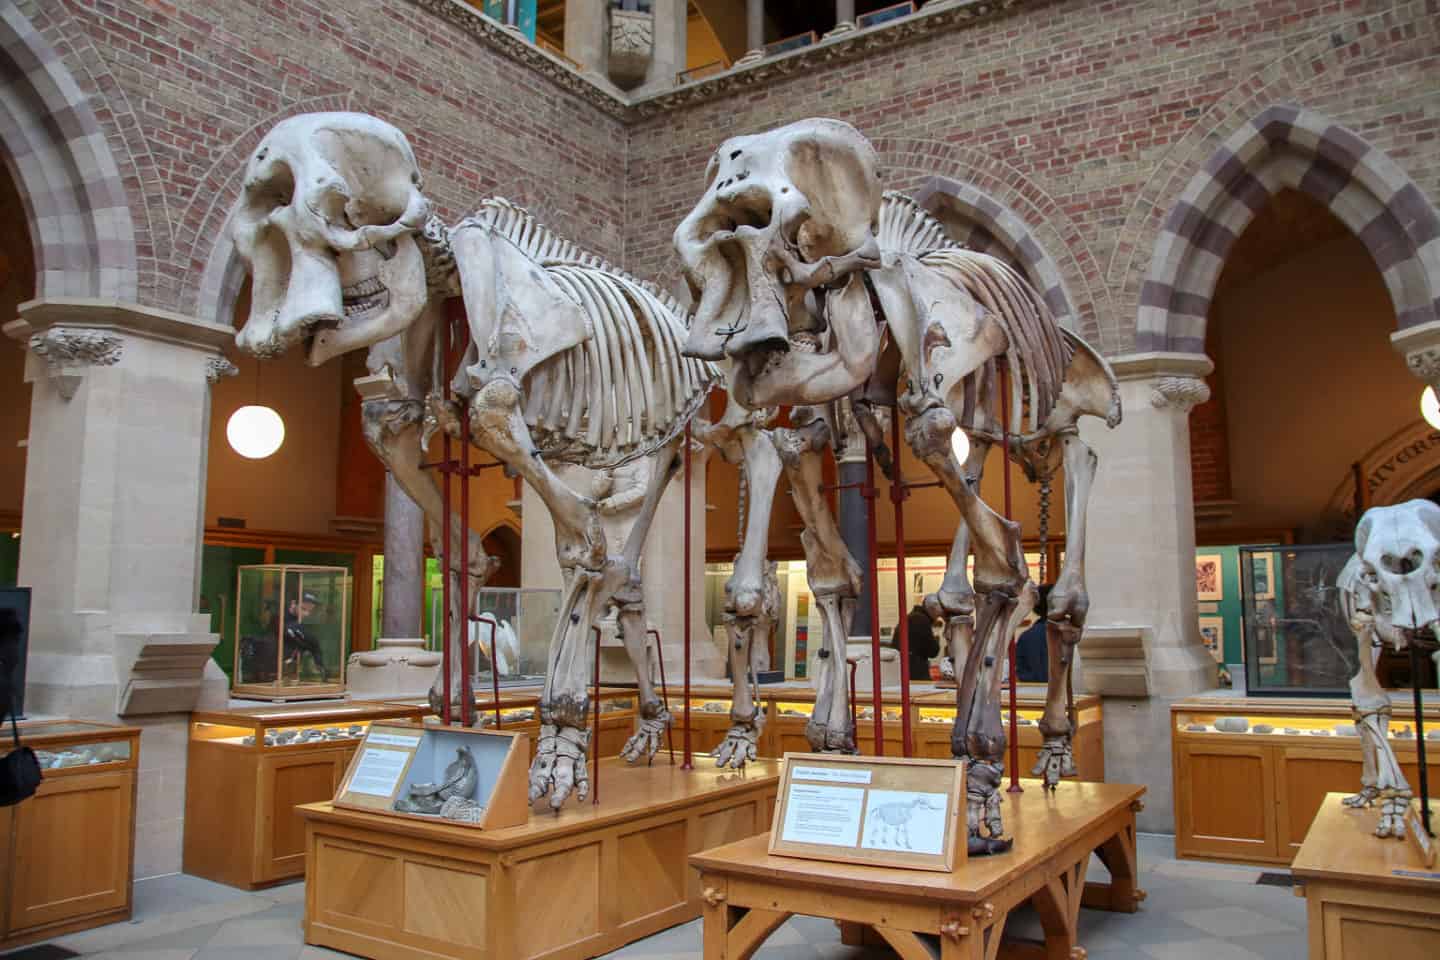 Skeletons at the Oxford Natural History Museum